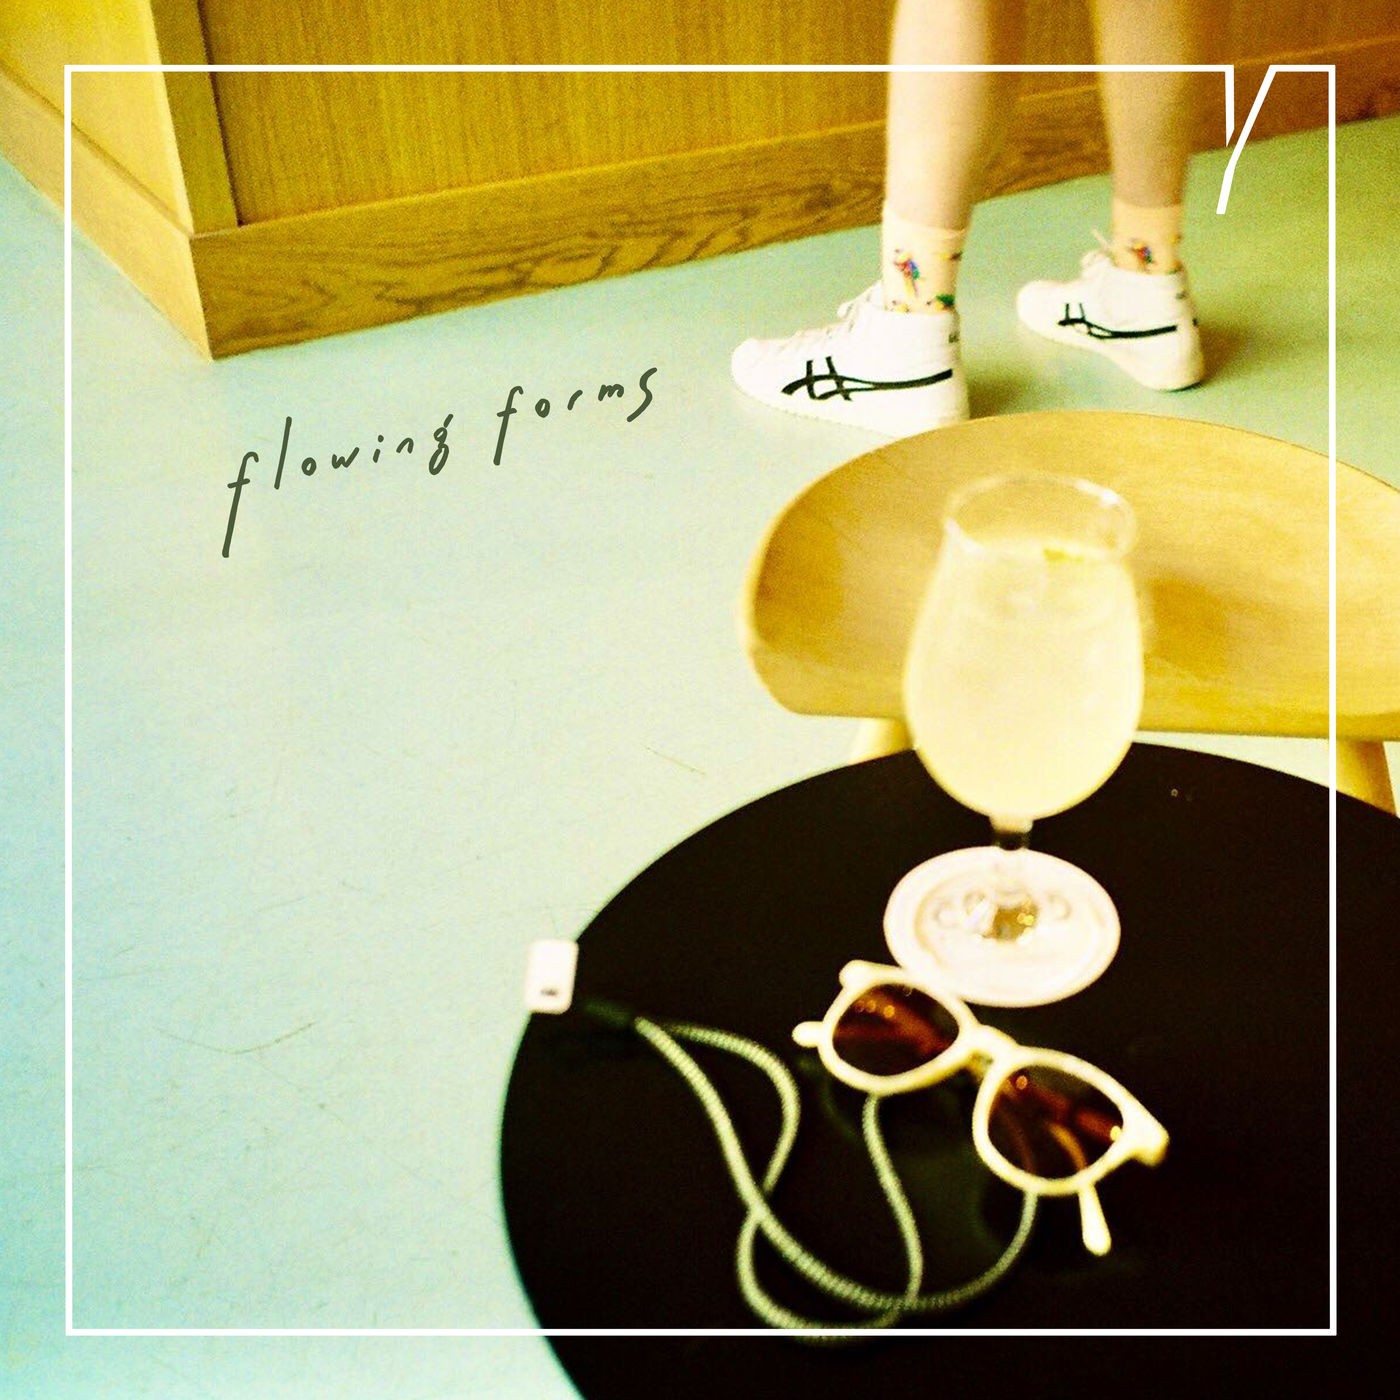 Yunomi (ゆのみ) – flowing forms [FLAC / WEB] [2020.05.01]